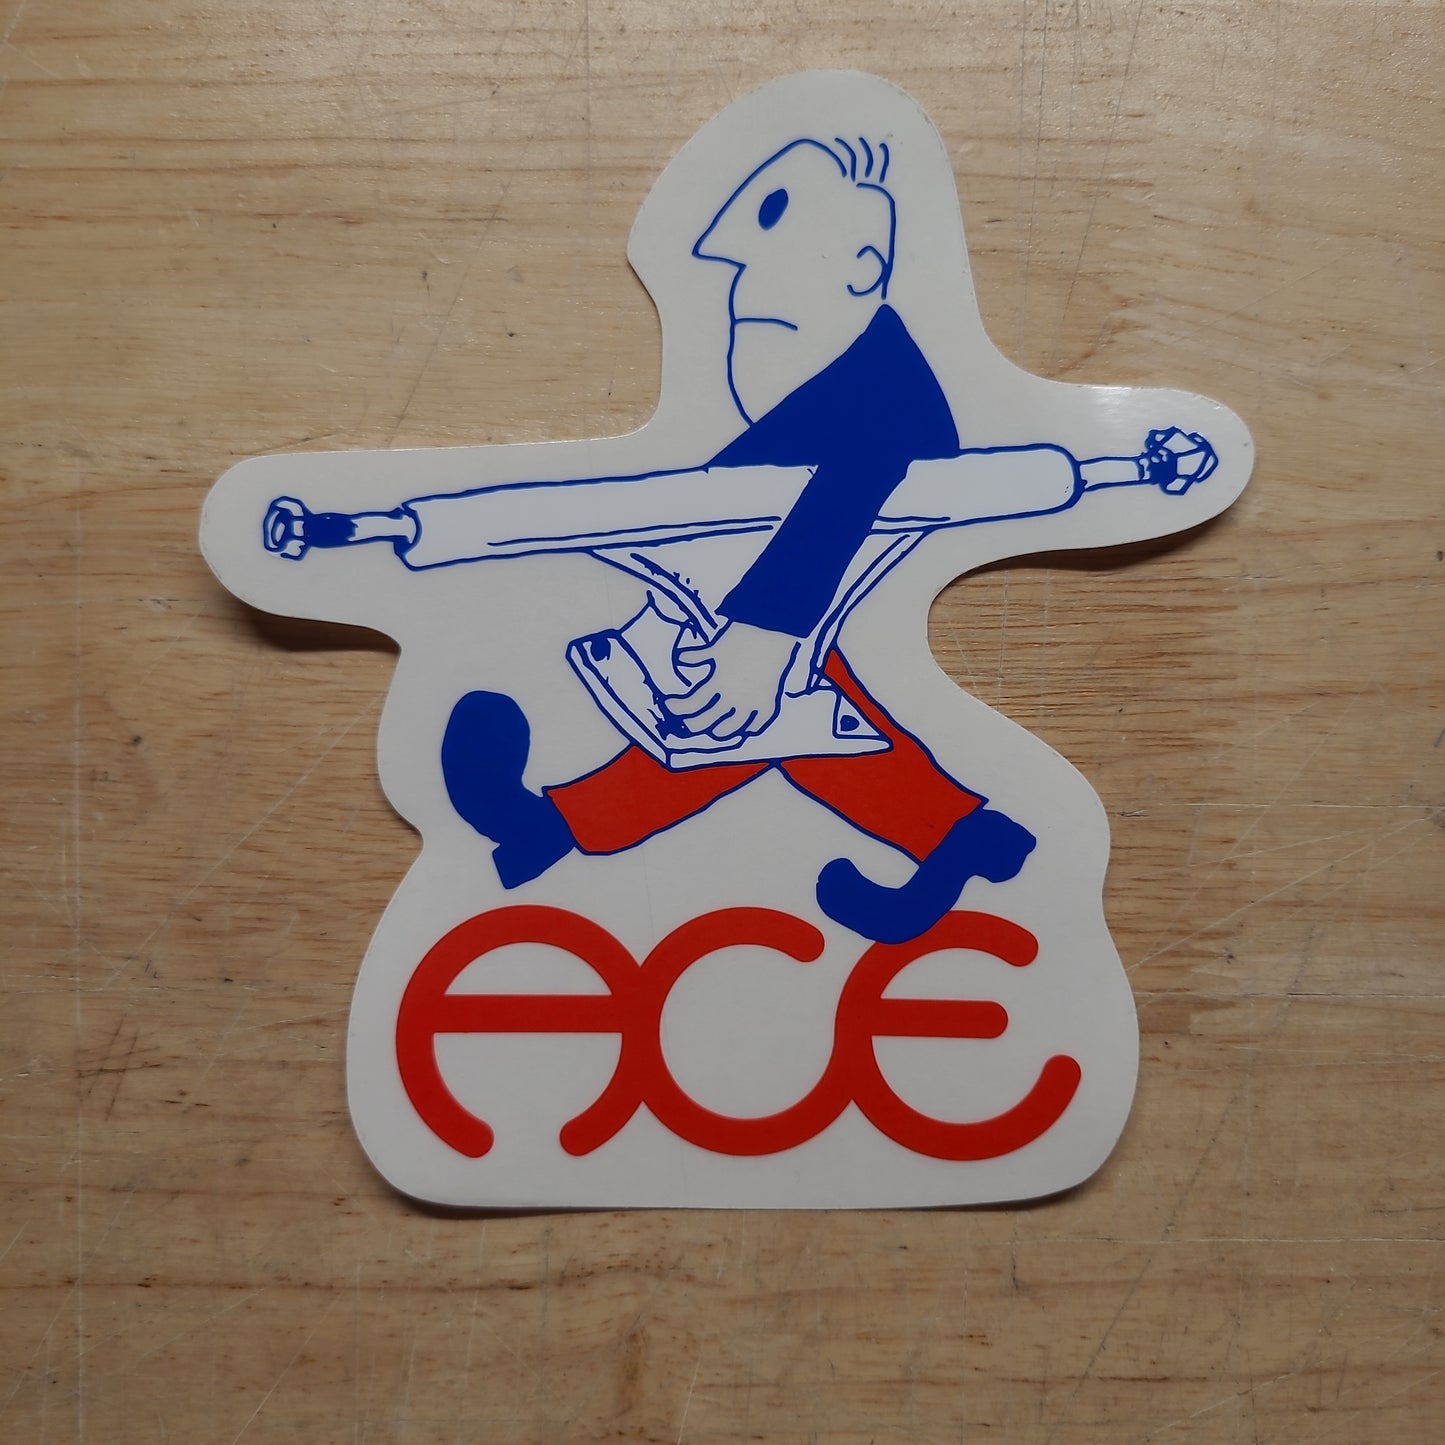 Ace Trucks - Large Graphic Stickers